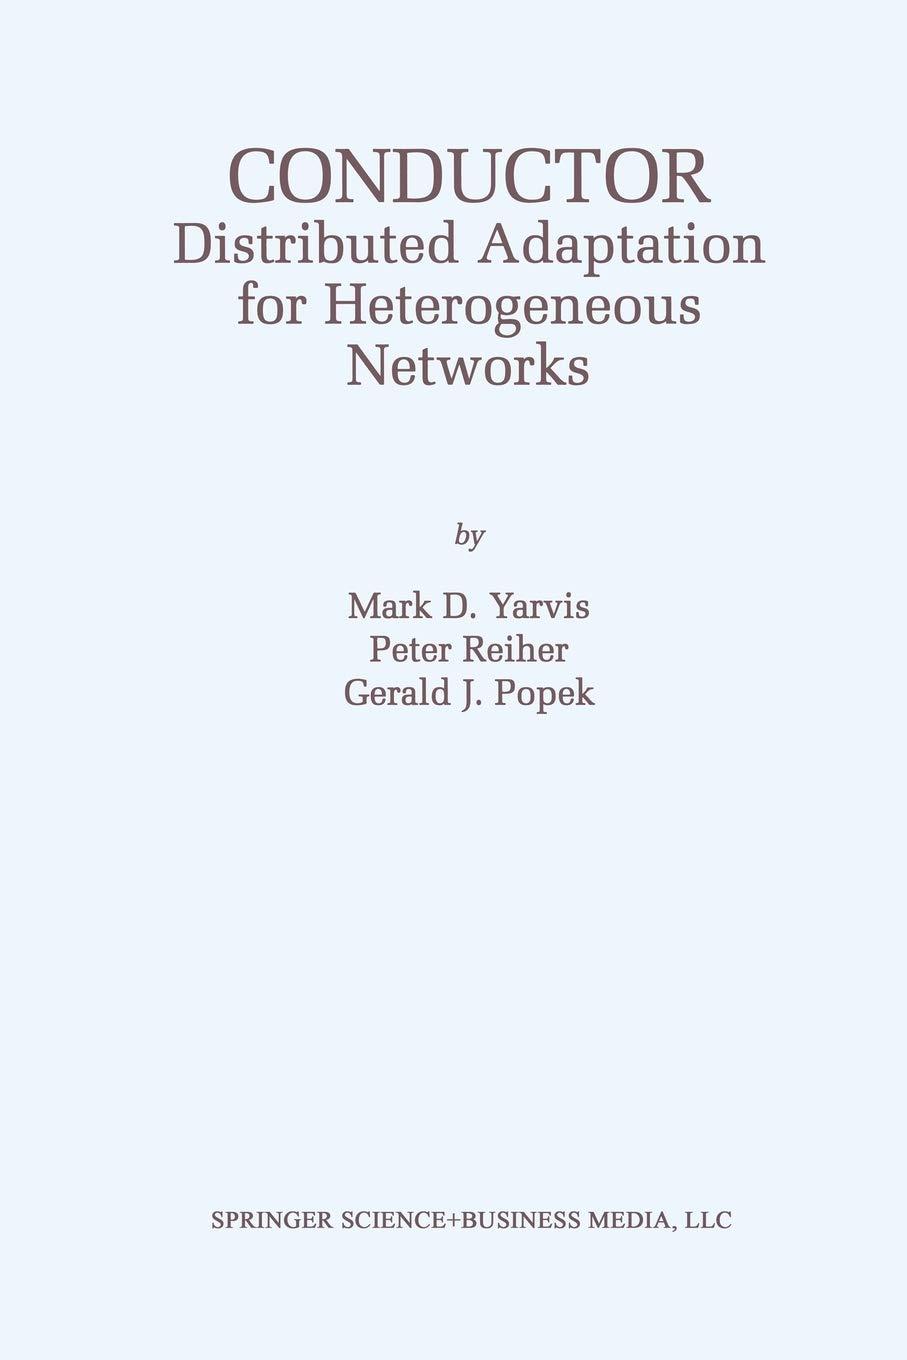 conductor distributed adaptation for heterogeneous networks 2002 edition mark d. yarvis, peter reiher, gerald